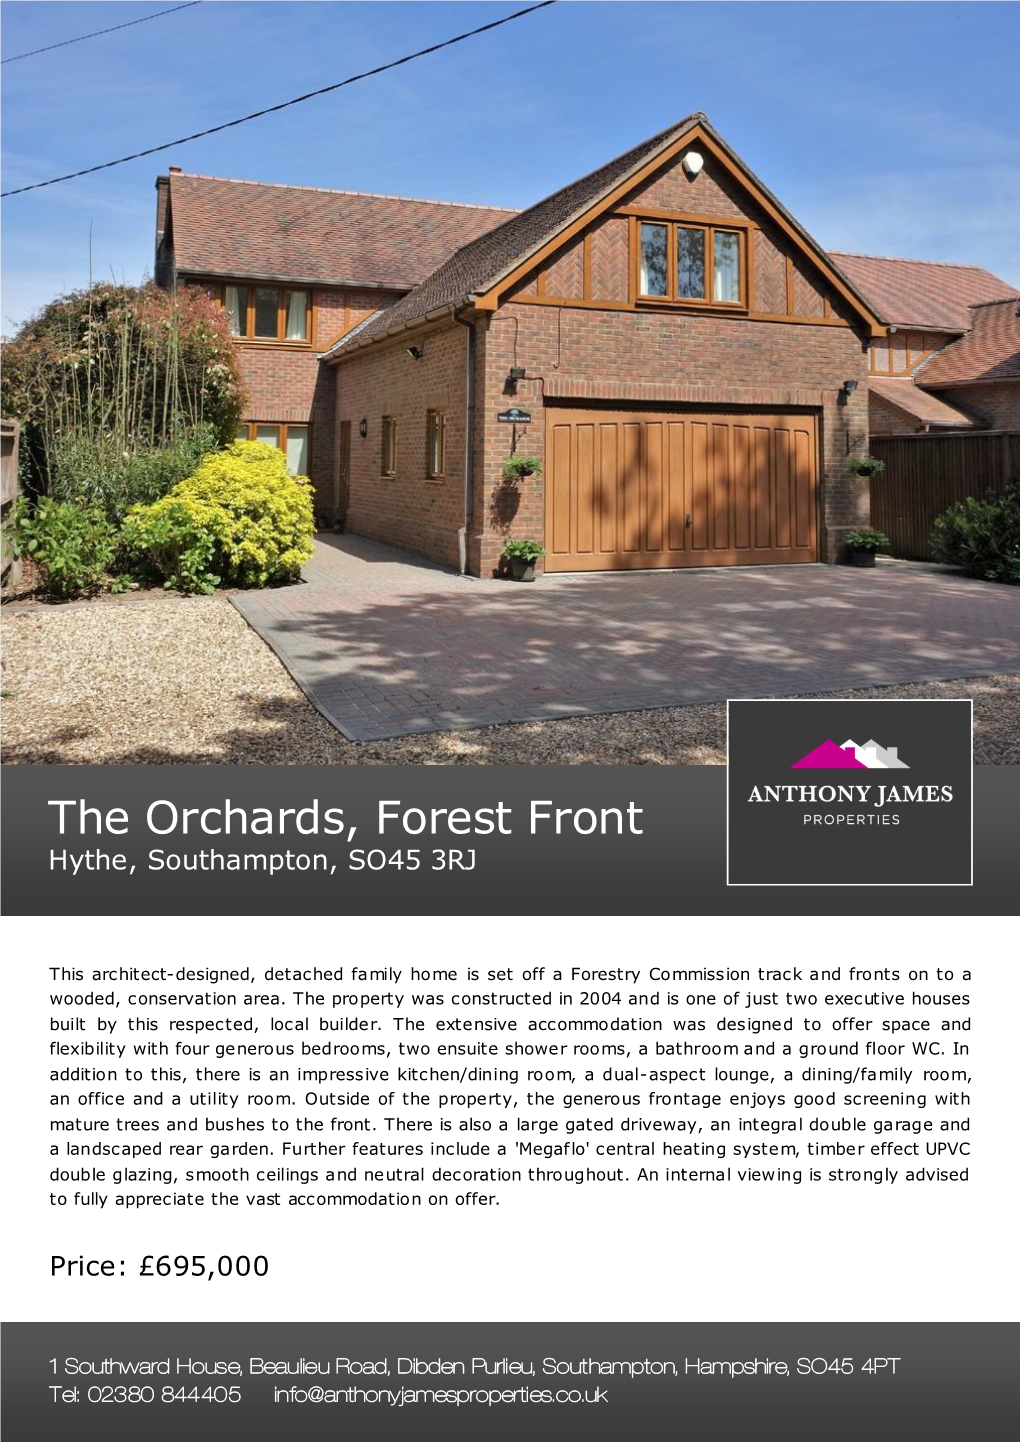 The Orchards, Forest Front Hythe, Southampton, SO45 3RJ